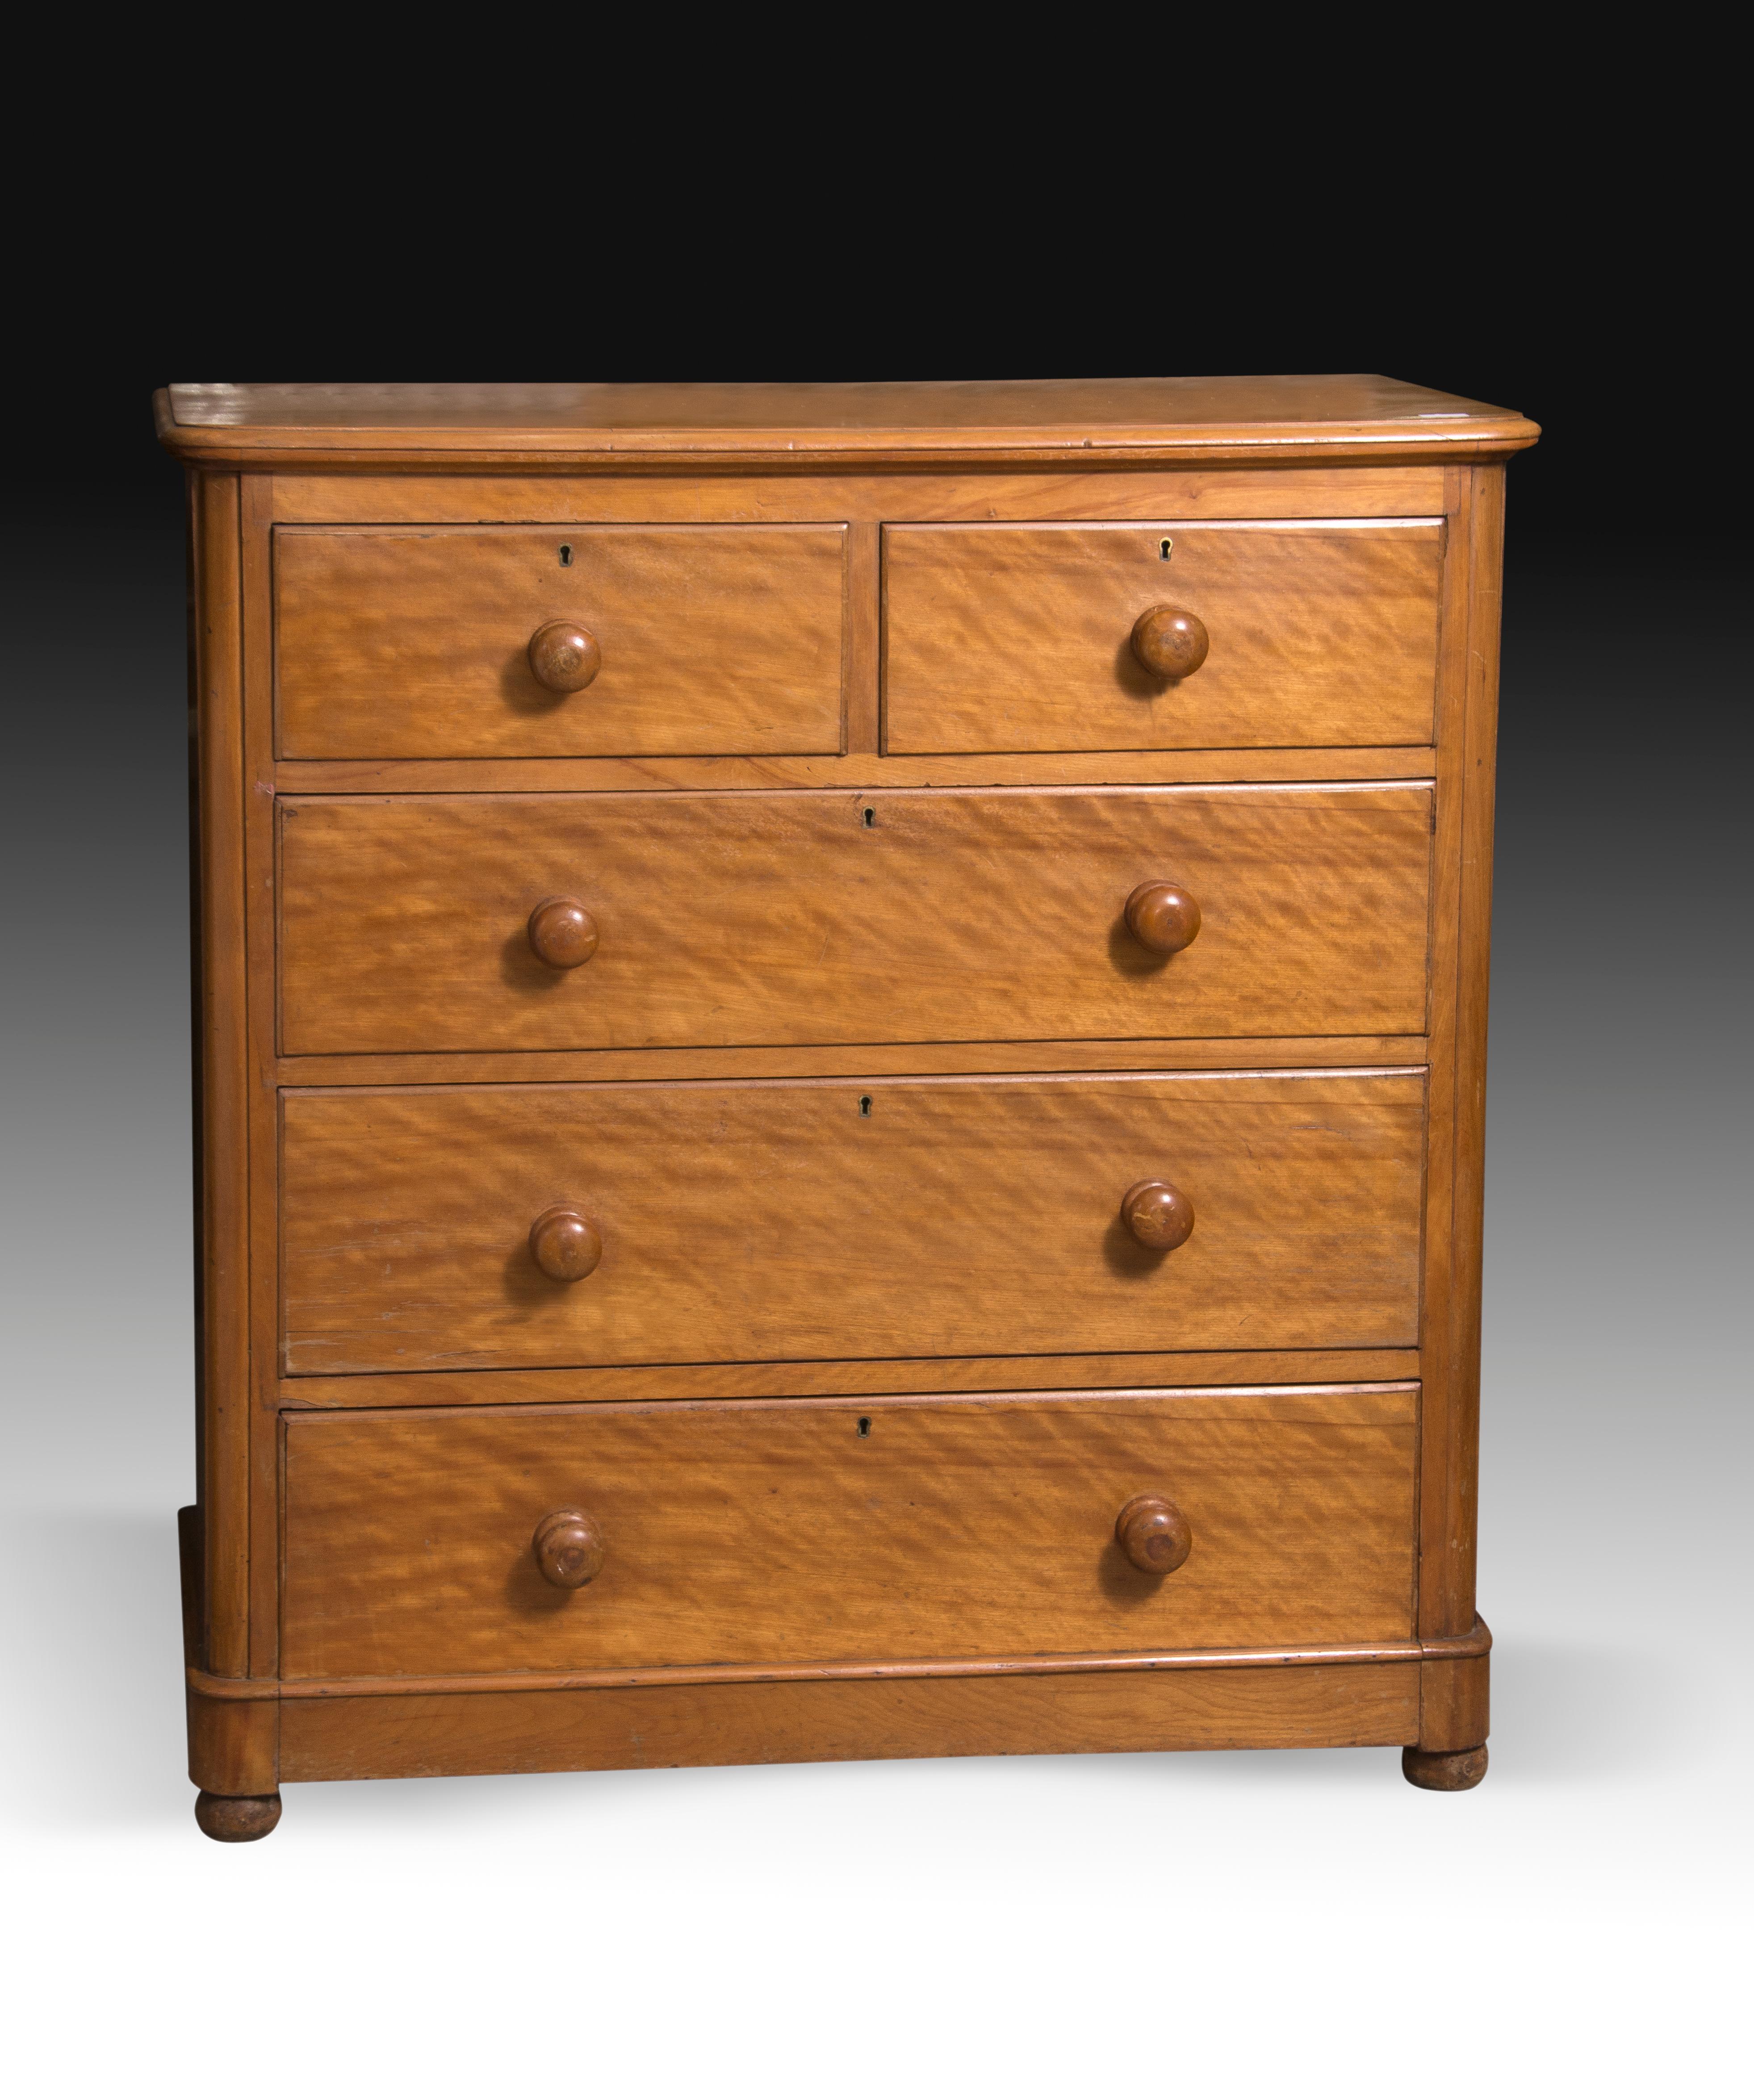 Lemonwood chest of drawers with straight and rectangular top board that has five drawers to the front (two narrower and three long), decorated with simple flat moldings and spherical legs. This decorative simplicity, which enhances the quality and